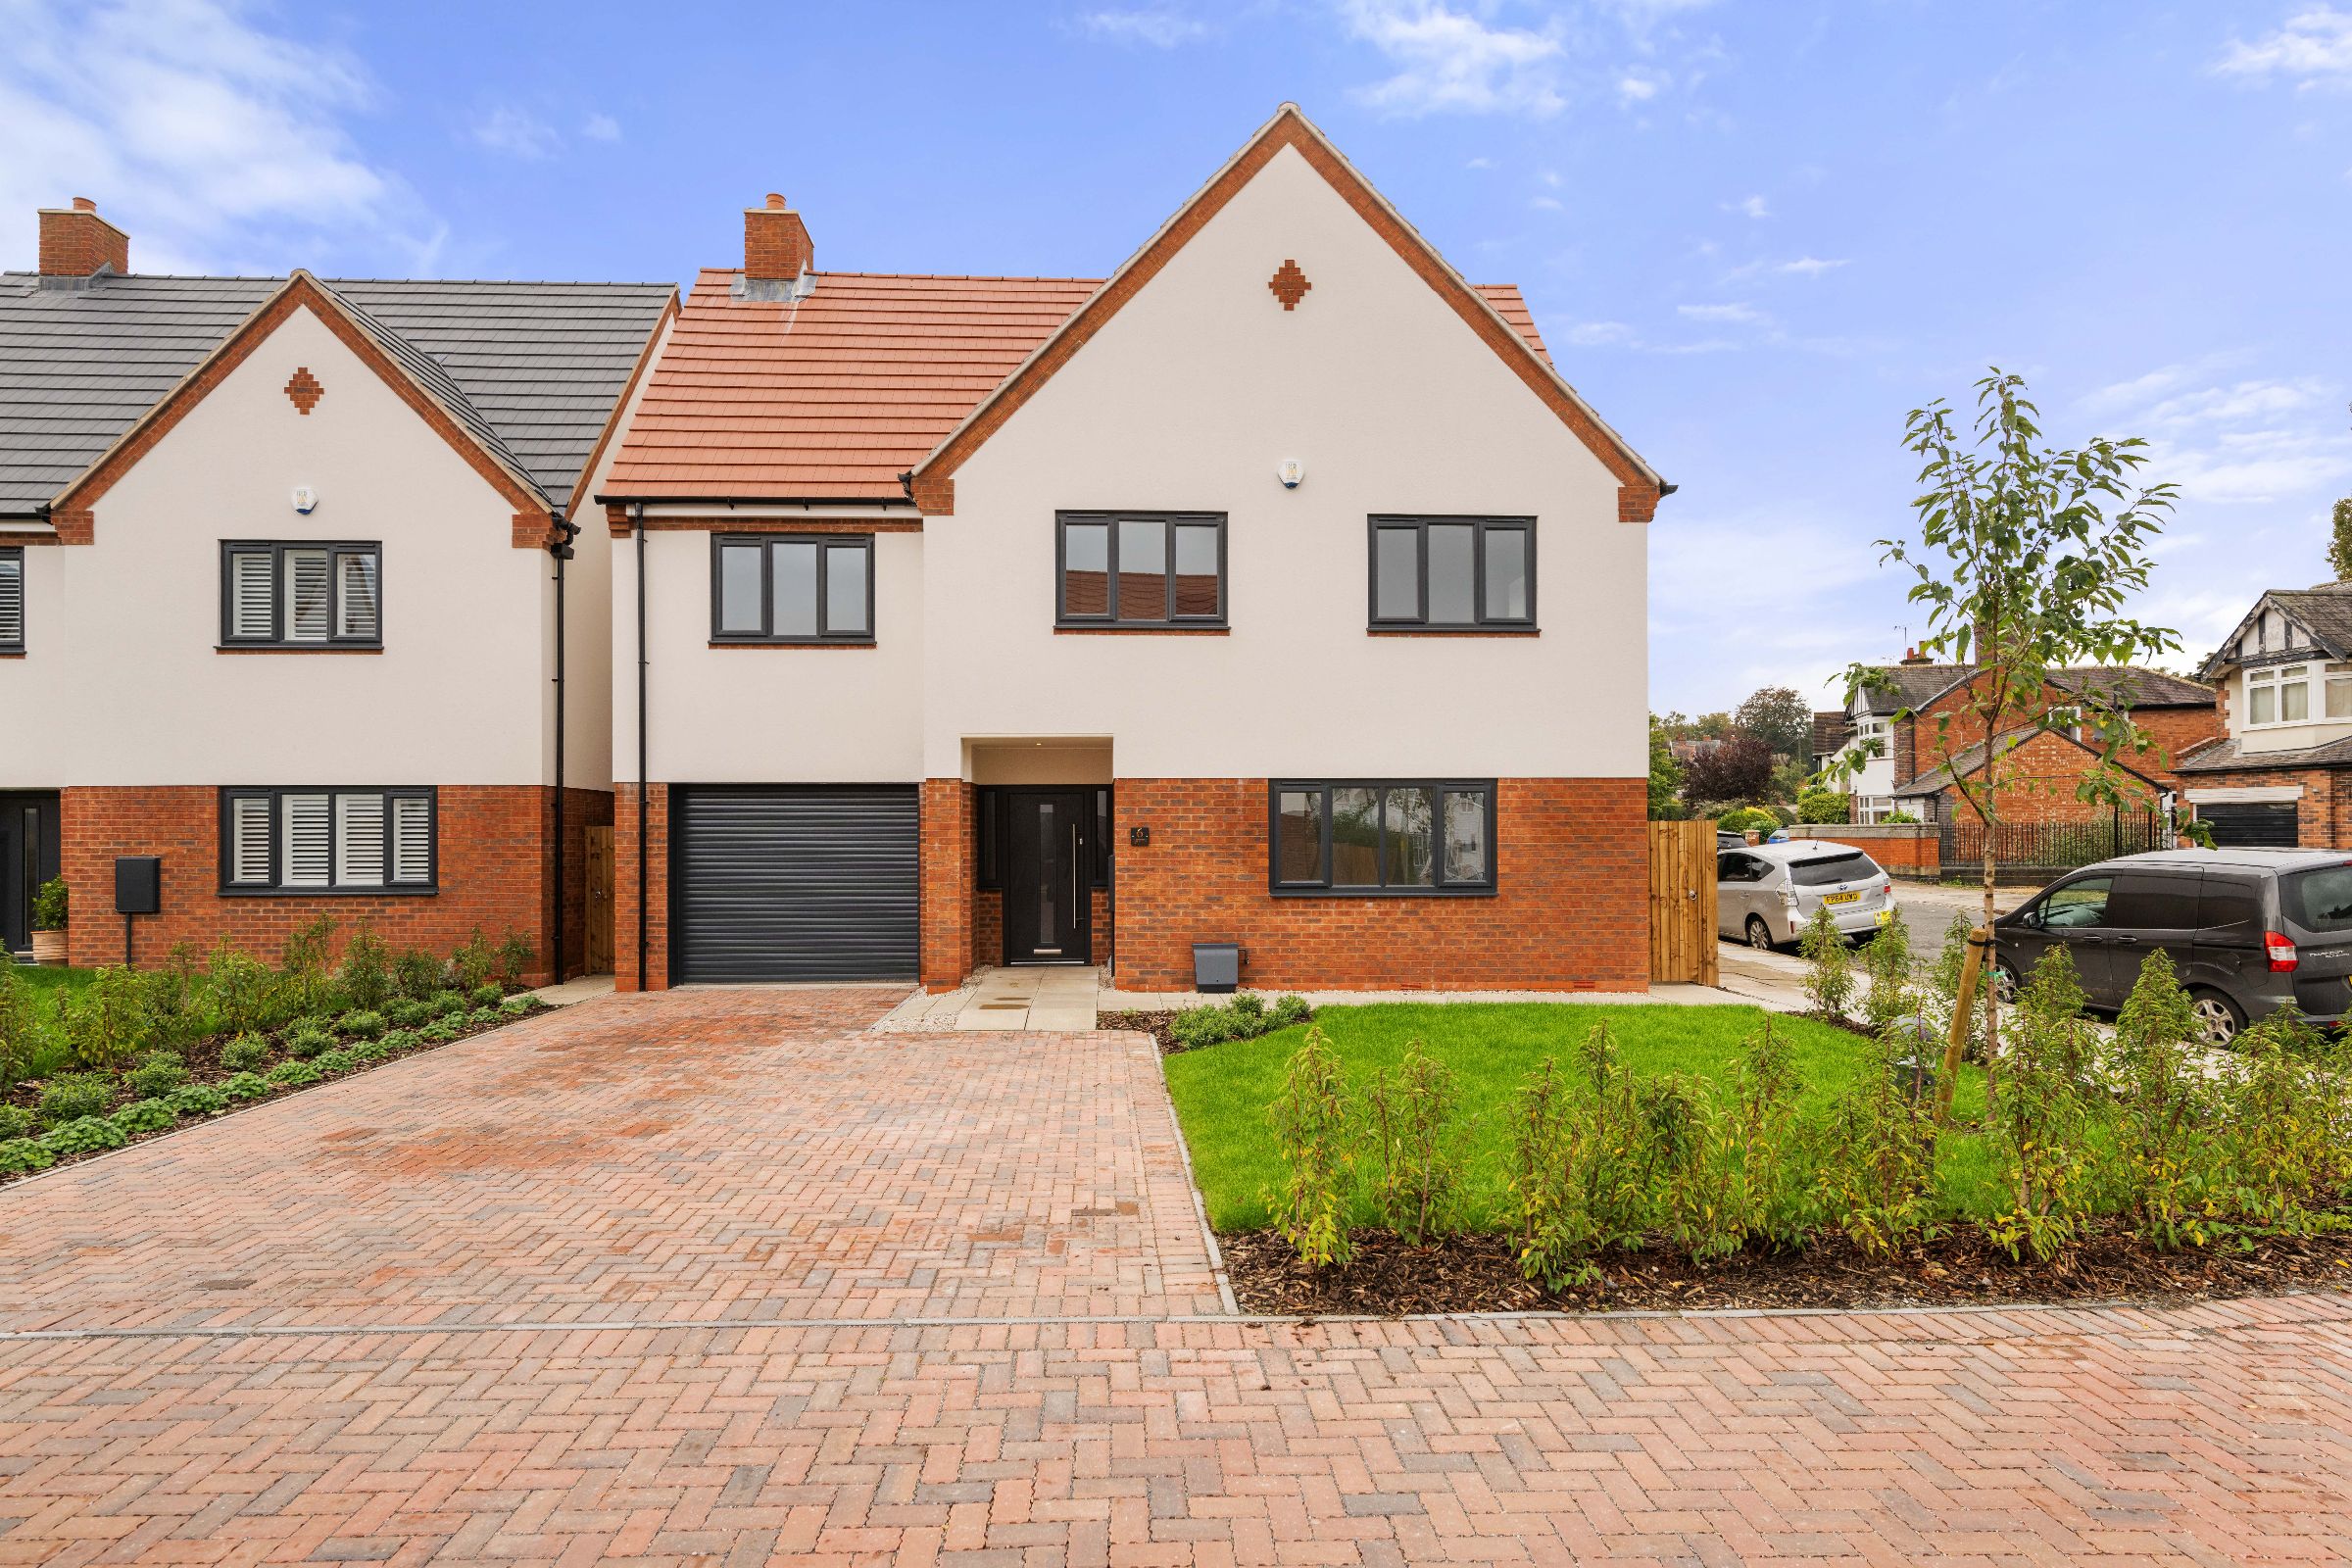 5 bed detached house to rent in Green View, Leicester, LE2 